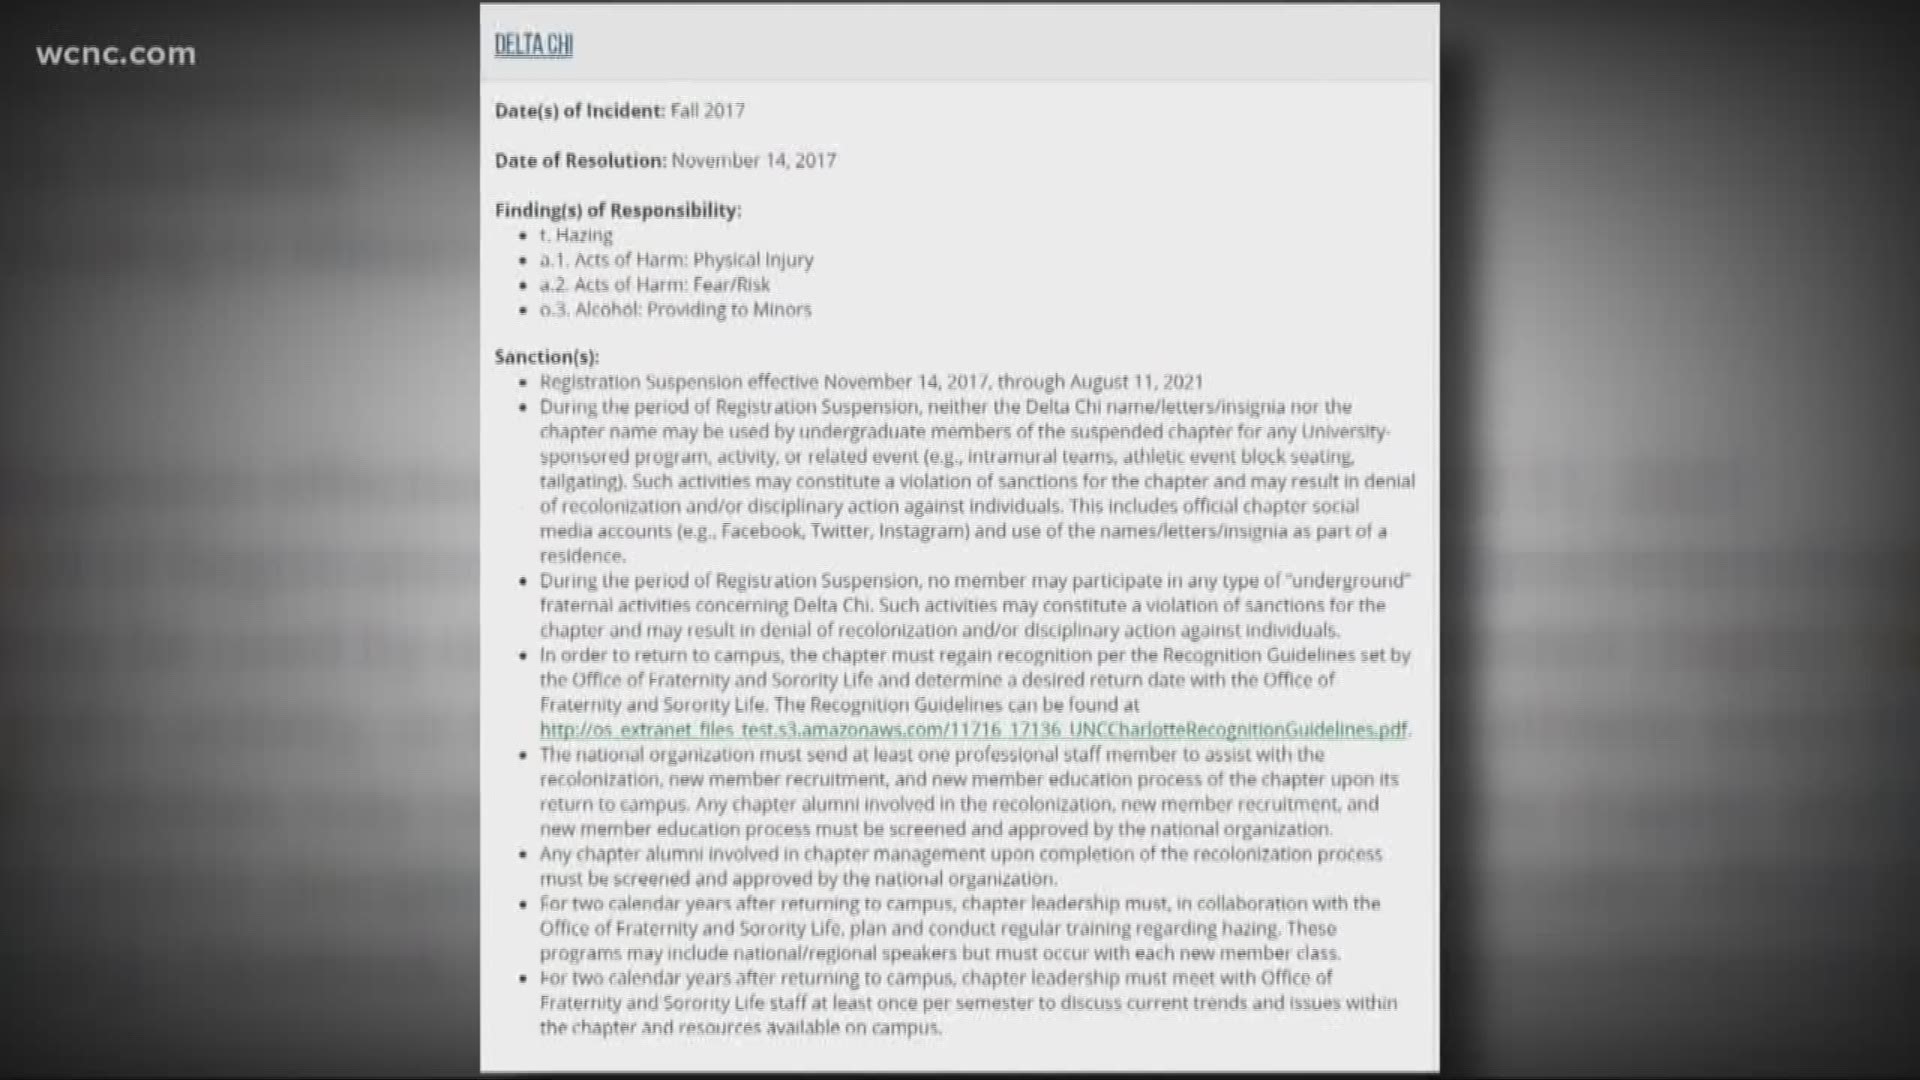 Three fraternities at UNC-Charlotte have been suspended for hazing and several other incidents over the last few months.